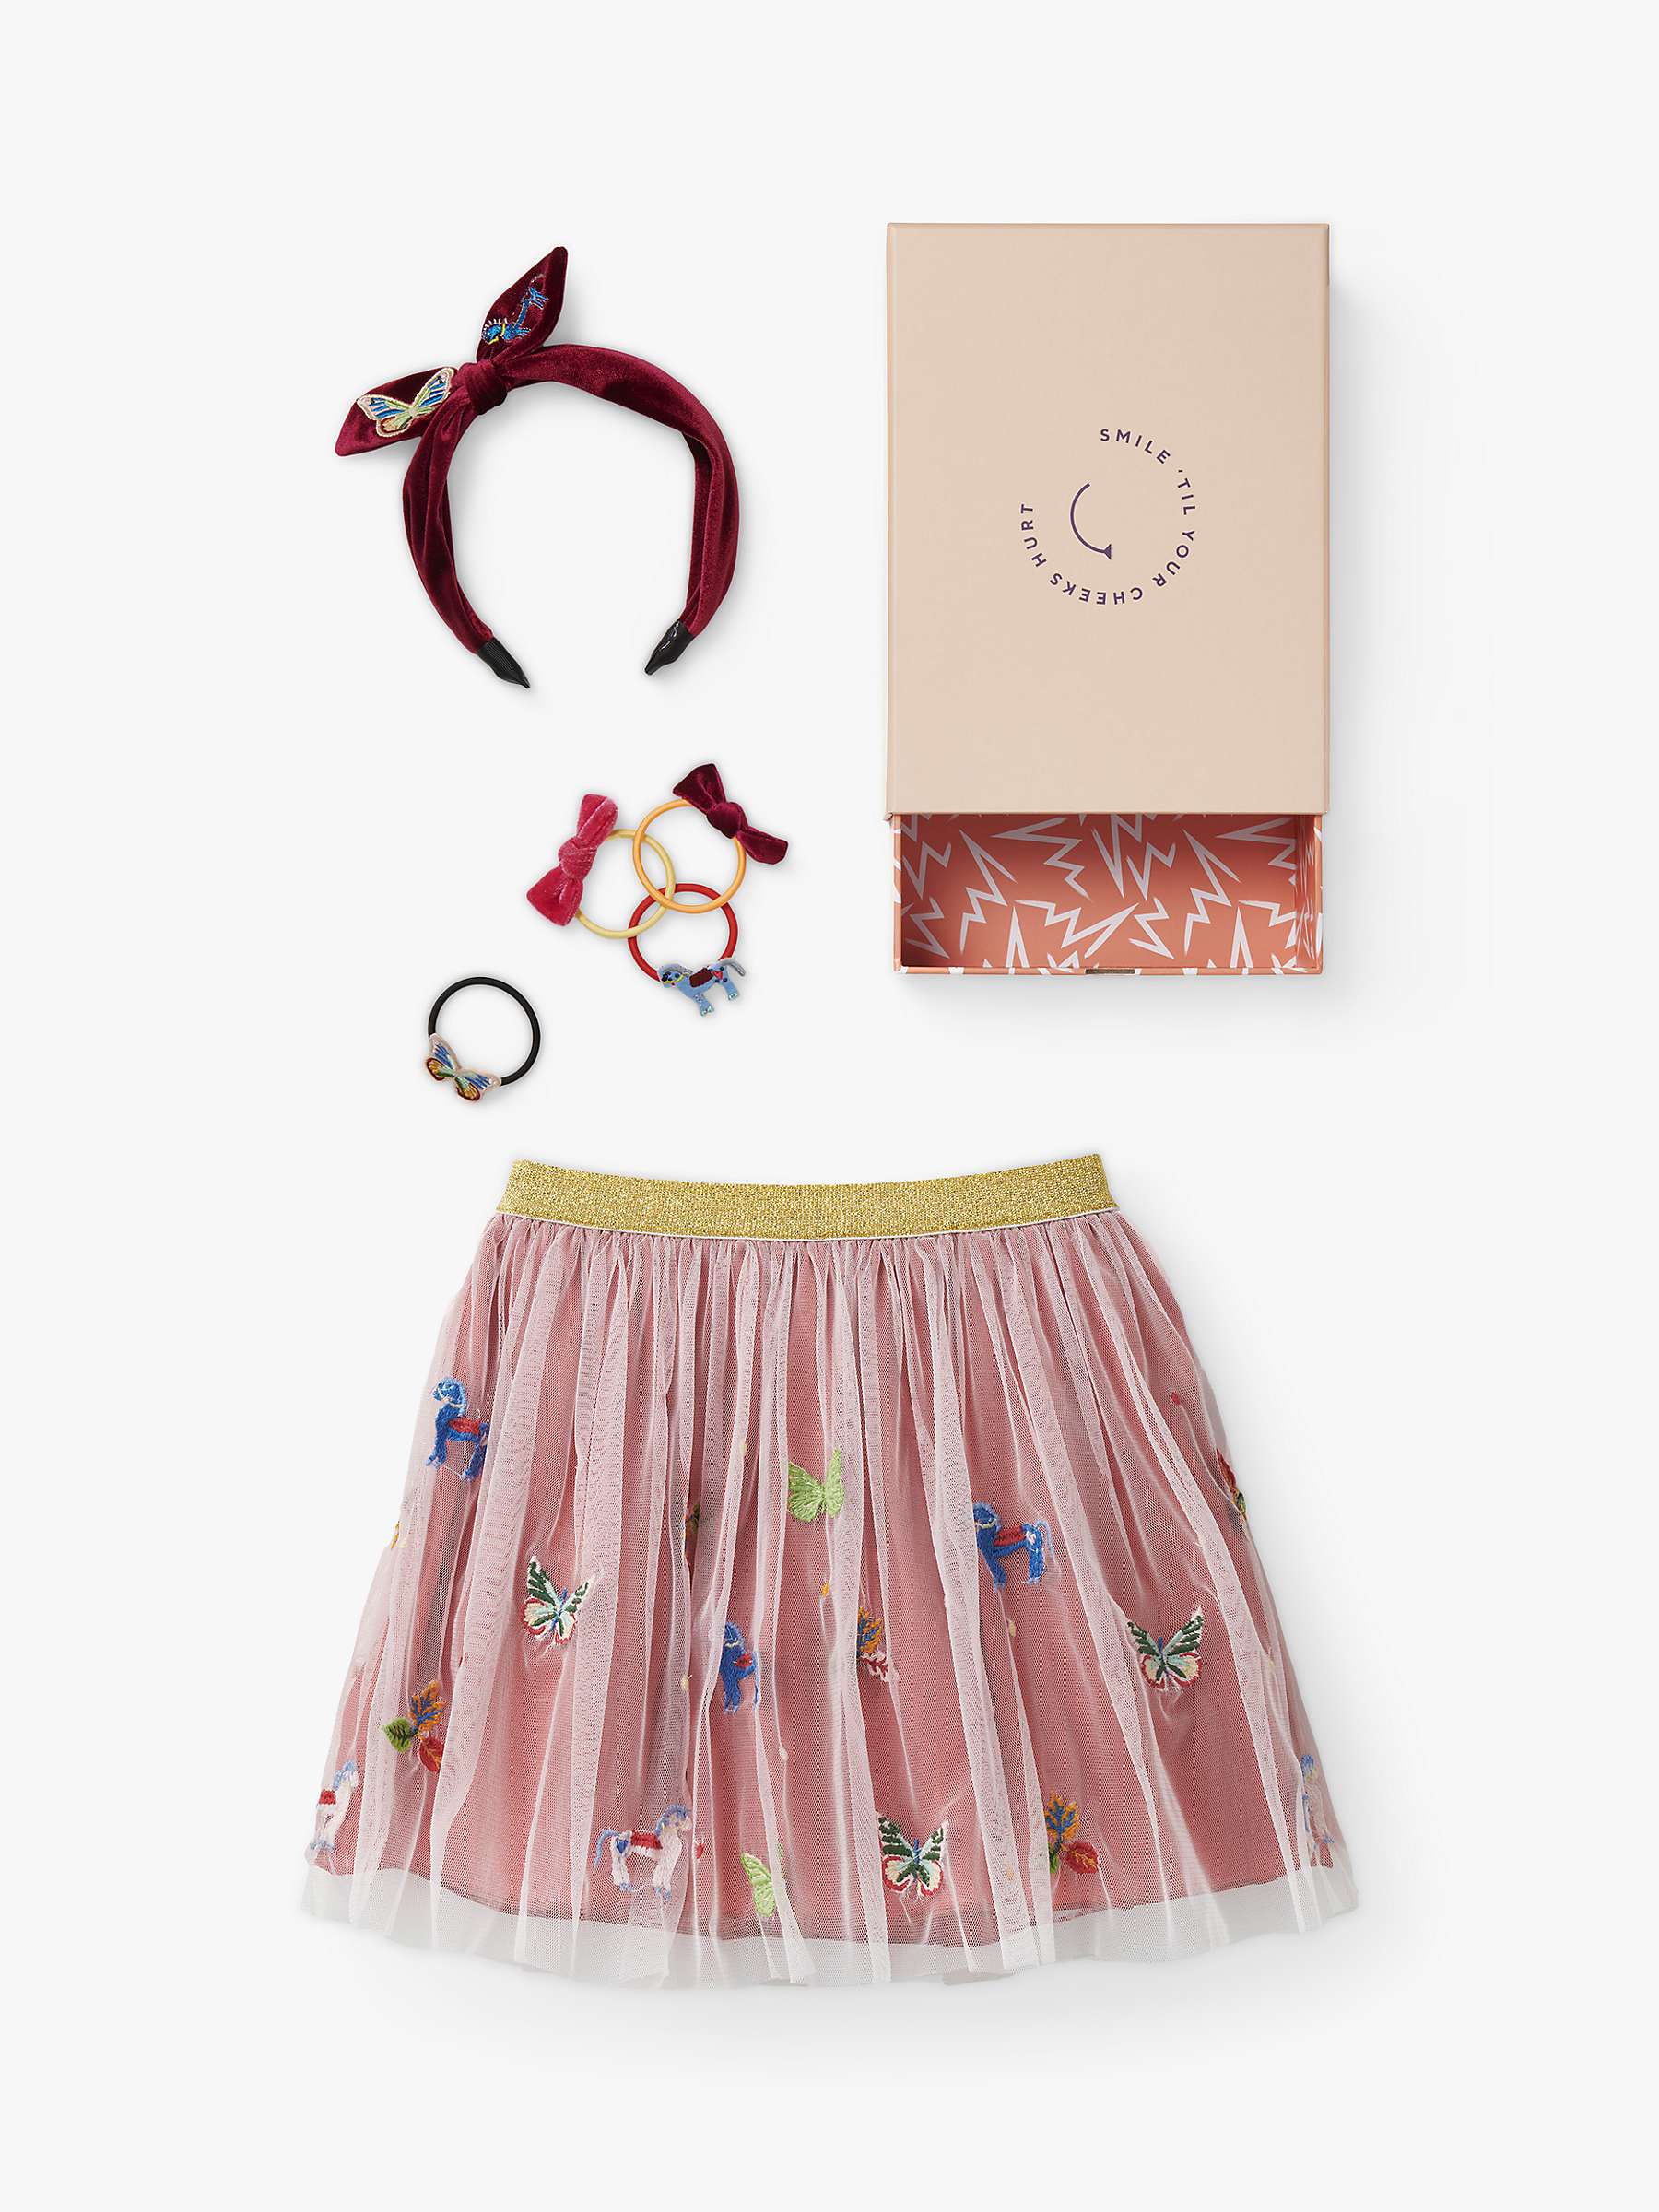 Buy Stych Kids' Butterfly & Unicorn Tulle Skirt & Accessories Gift Box Set, Multi Online at johnlewis.com